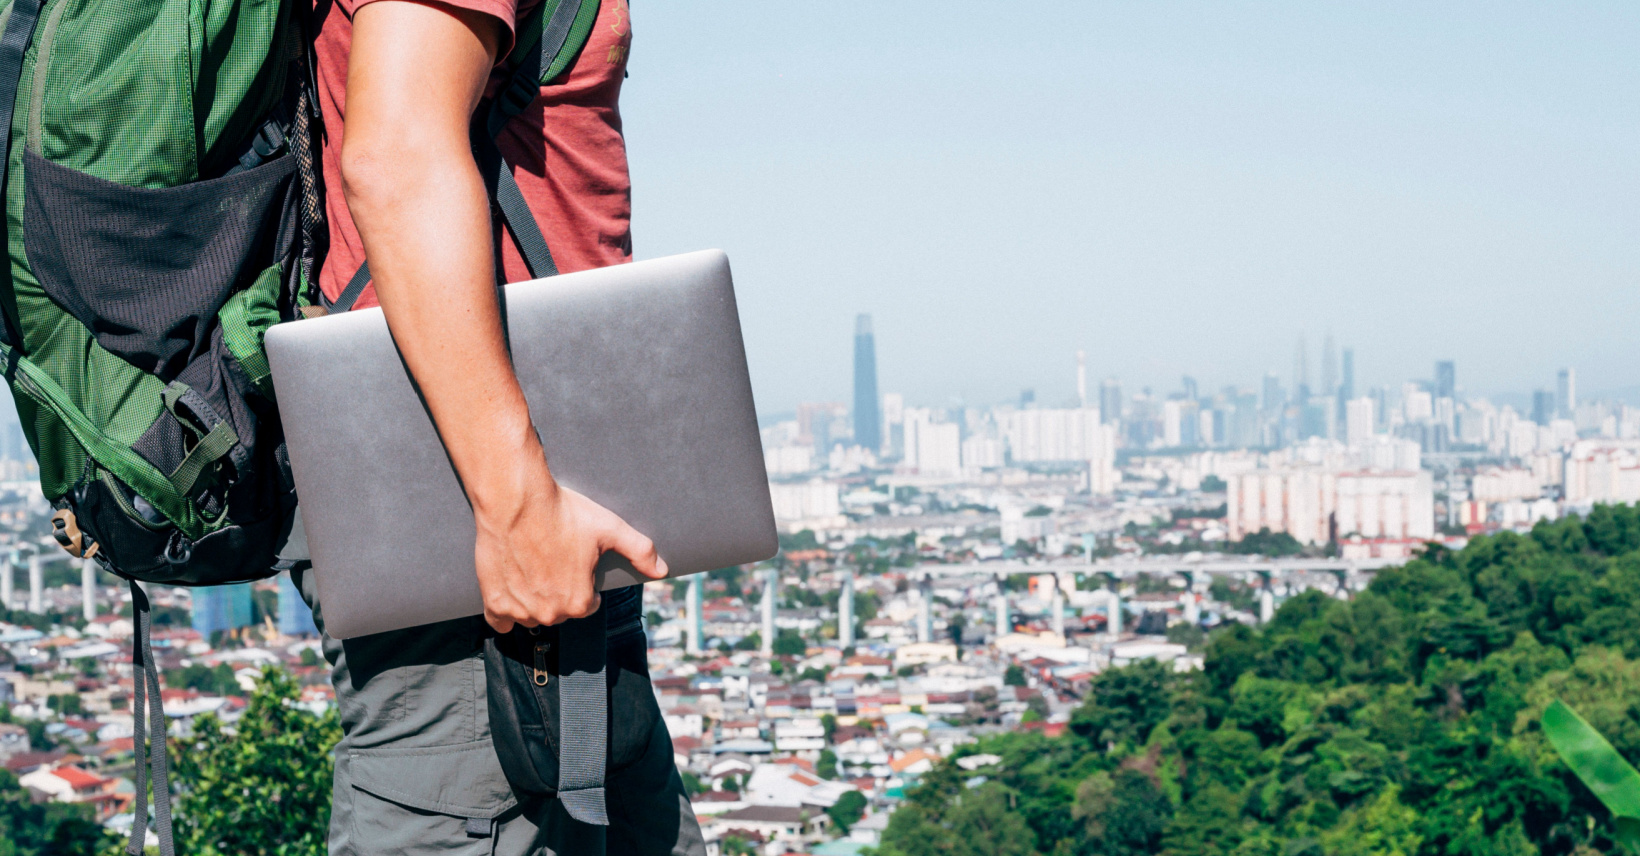 Nomad Life Hacks: Simple Solutions for a More Productive and Fulfilling Remote Work Lifestyle